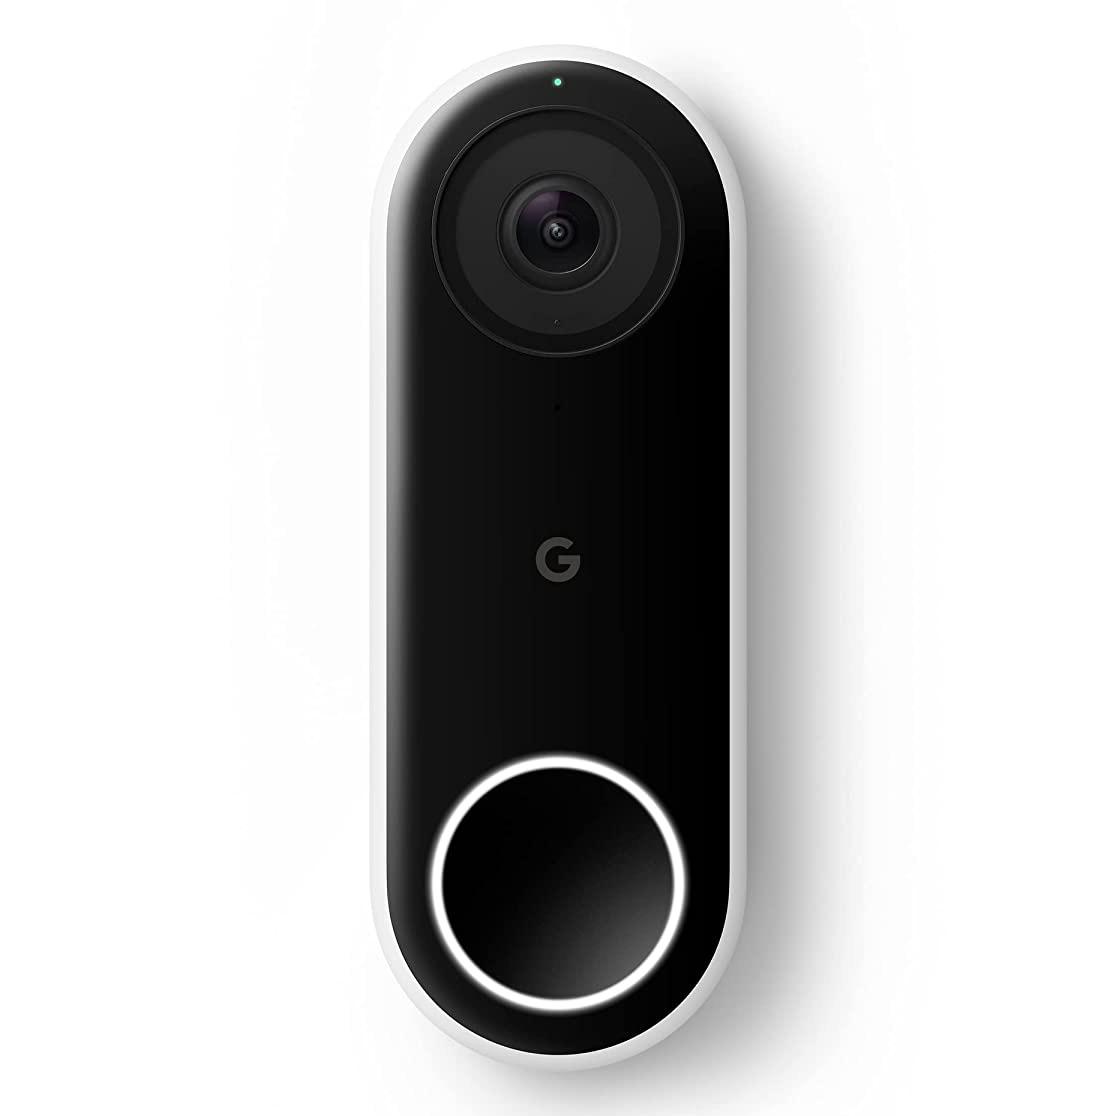 Google Nest Doorbell Wired Smart Security Camera for $113 Shipped